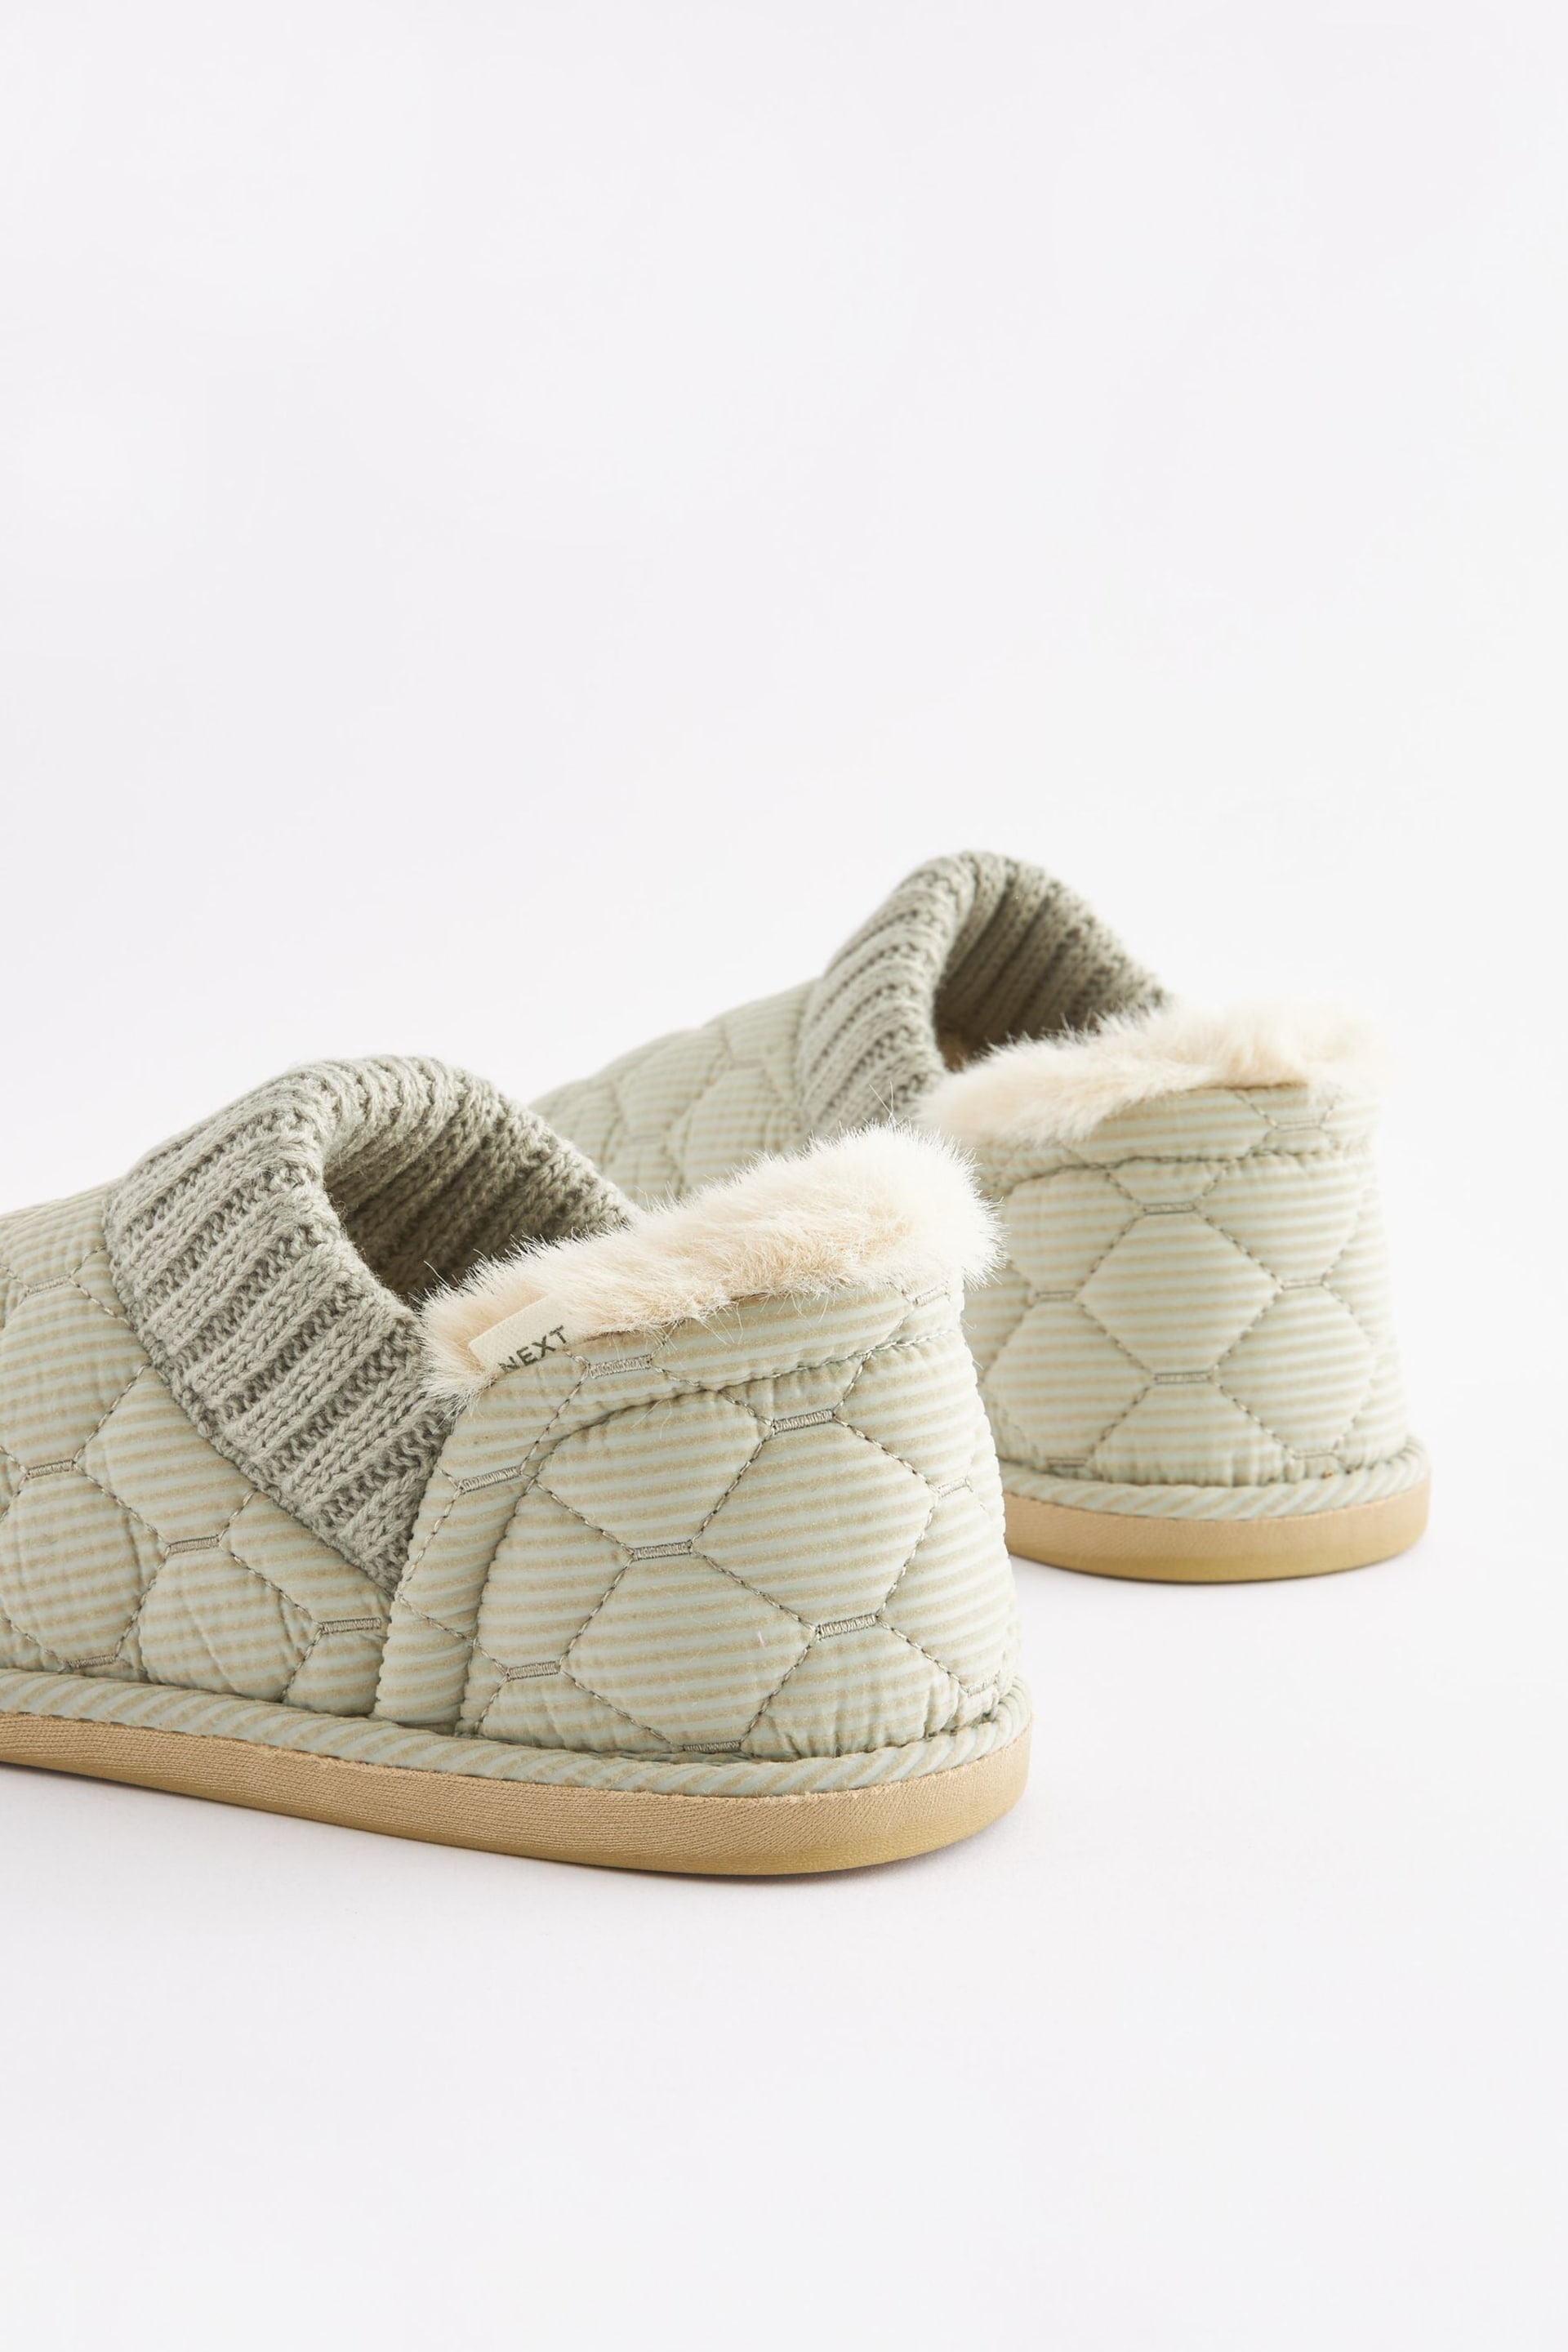 Grey Quilted Shoot Slippers - Image 6 of 7